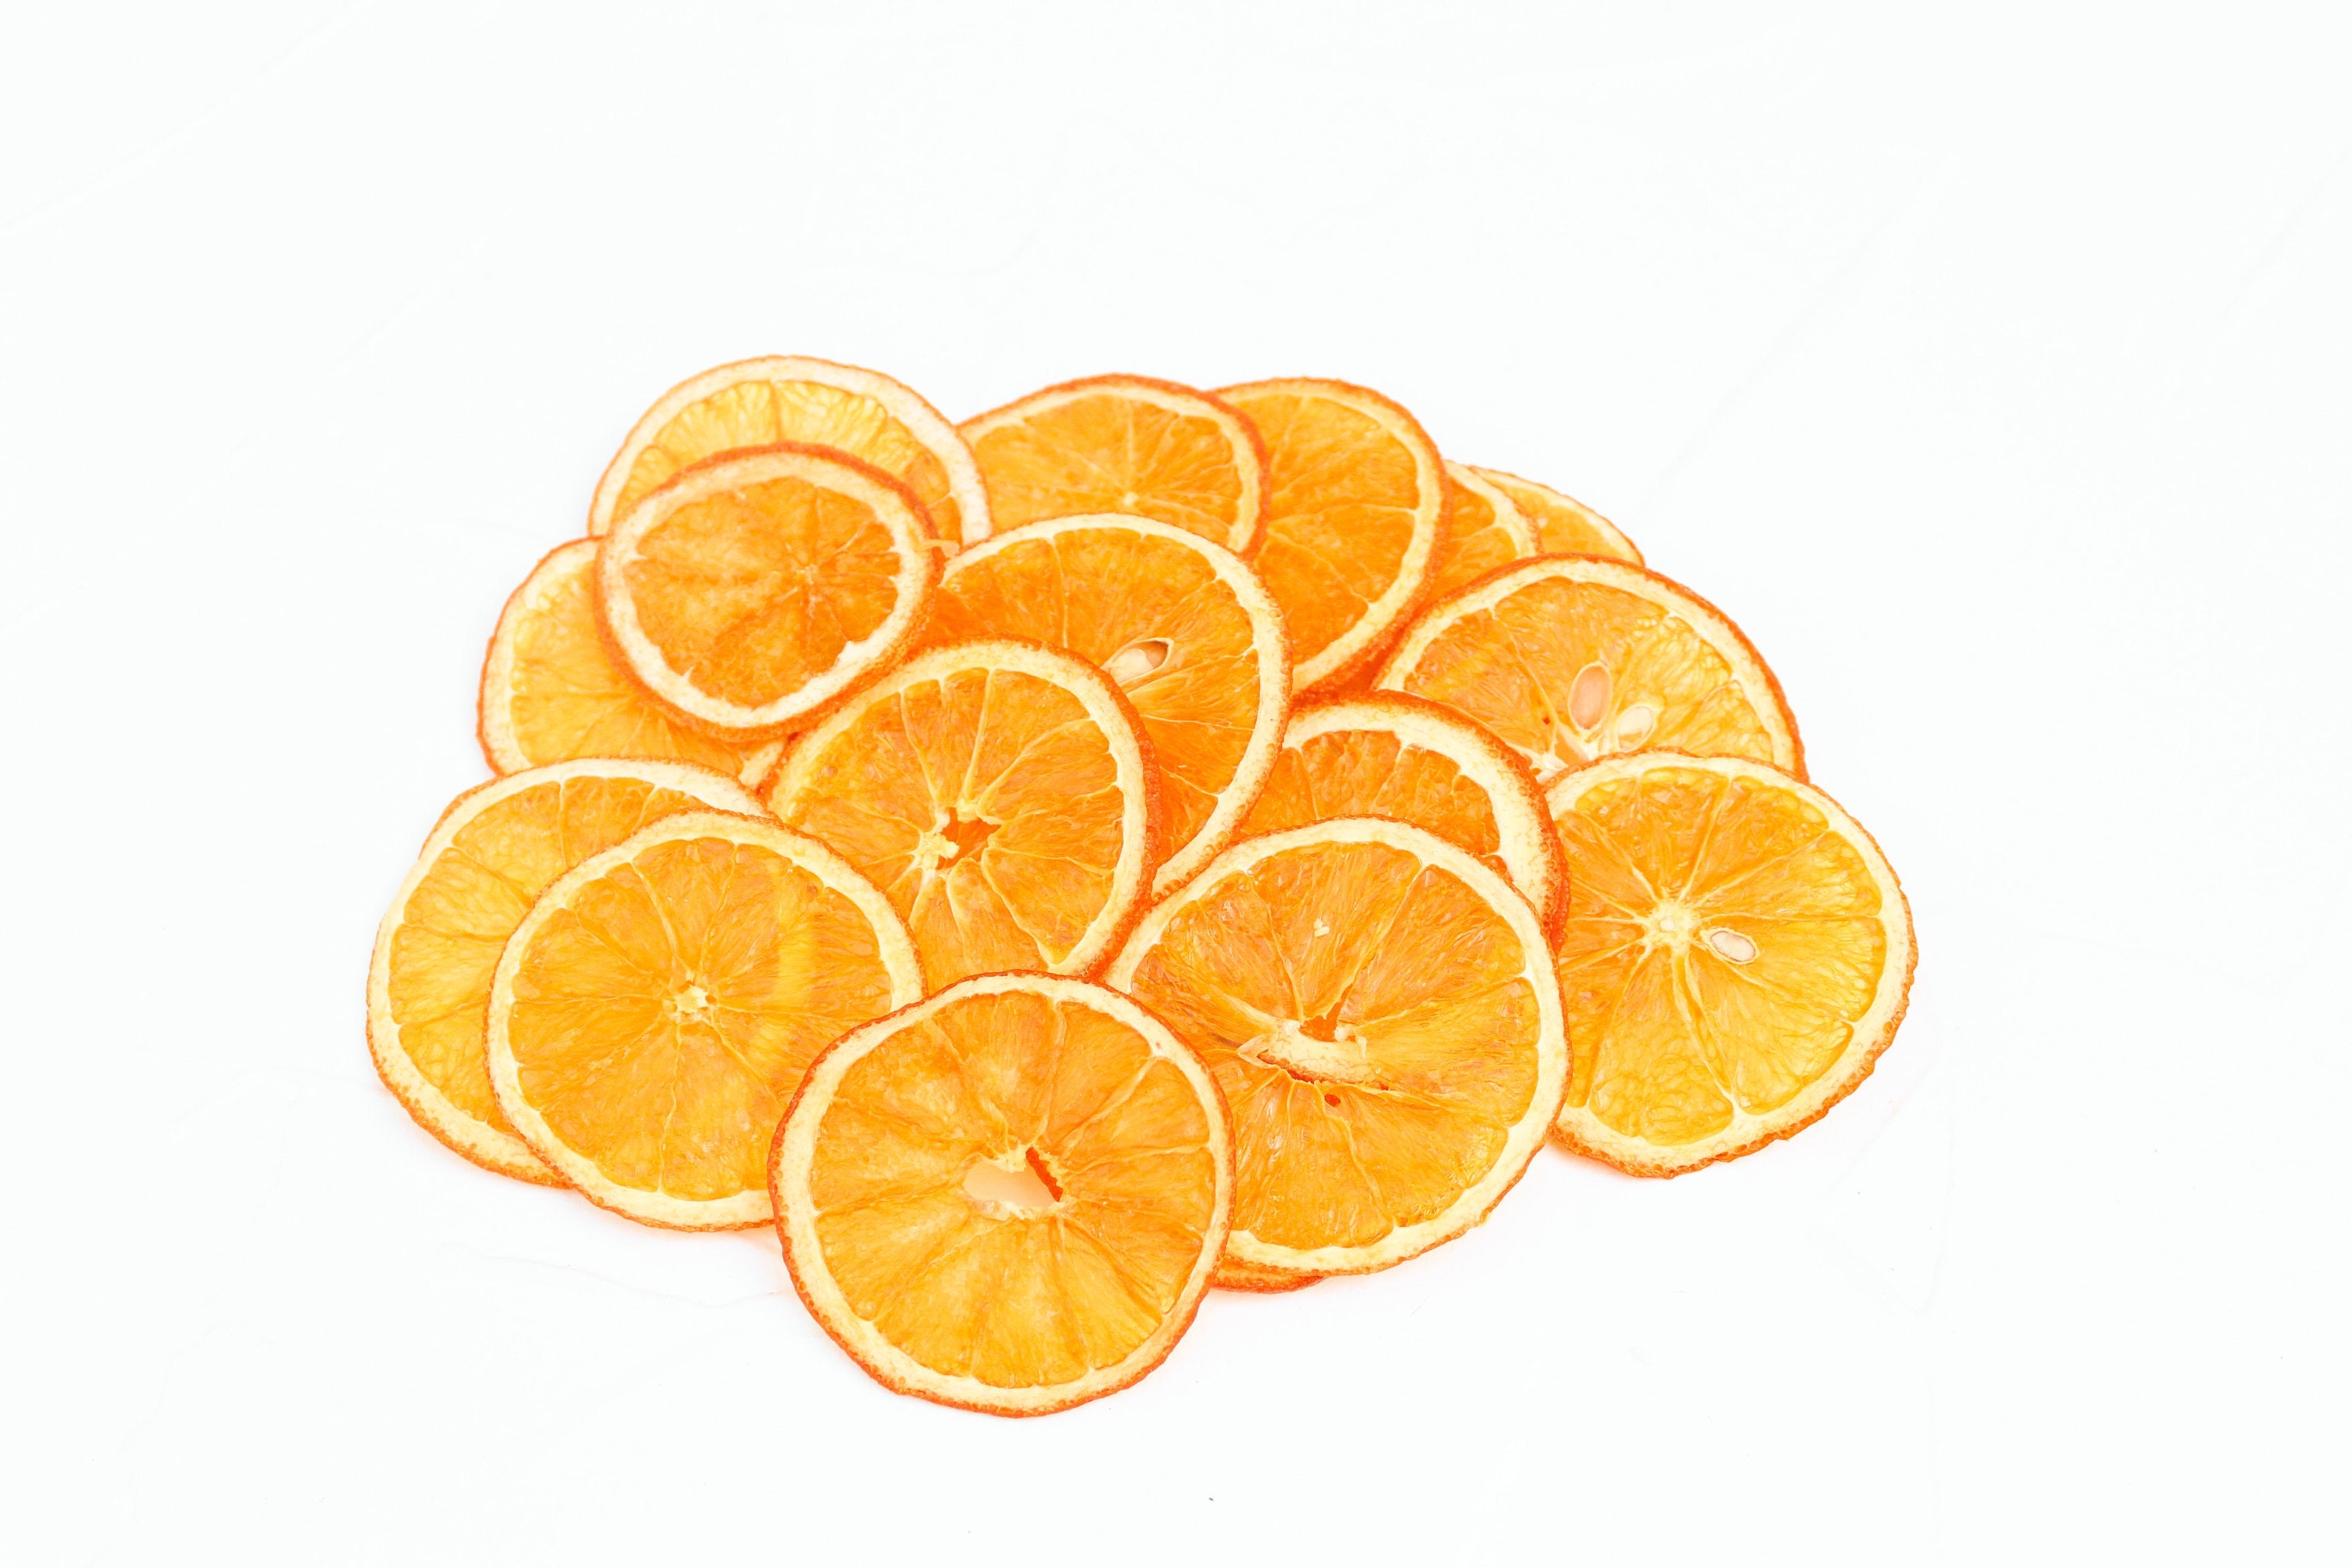 10 pcs of Dried Organic Orange Slices, 100% Natural, Air-Dried